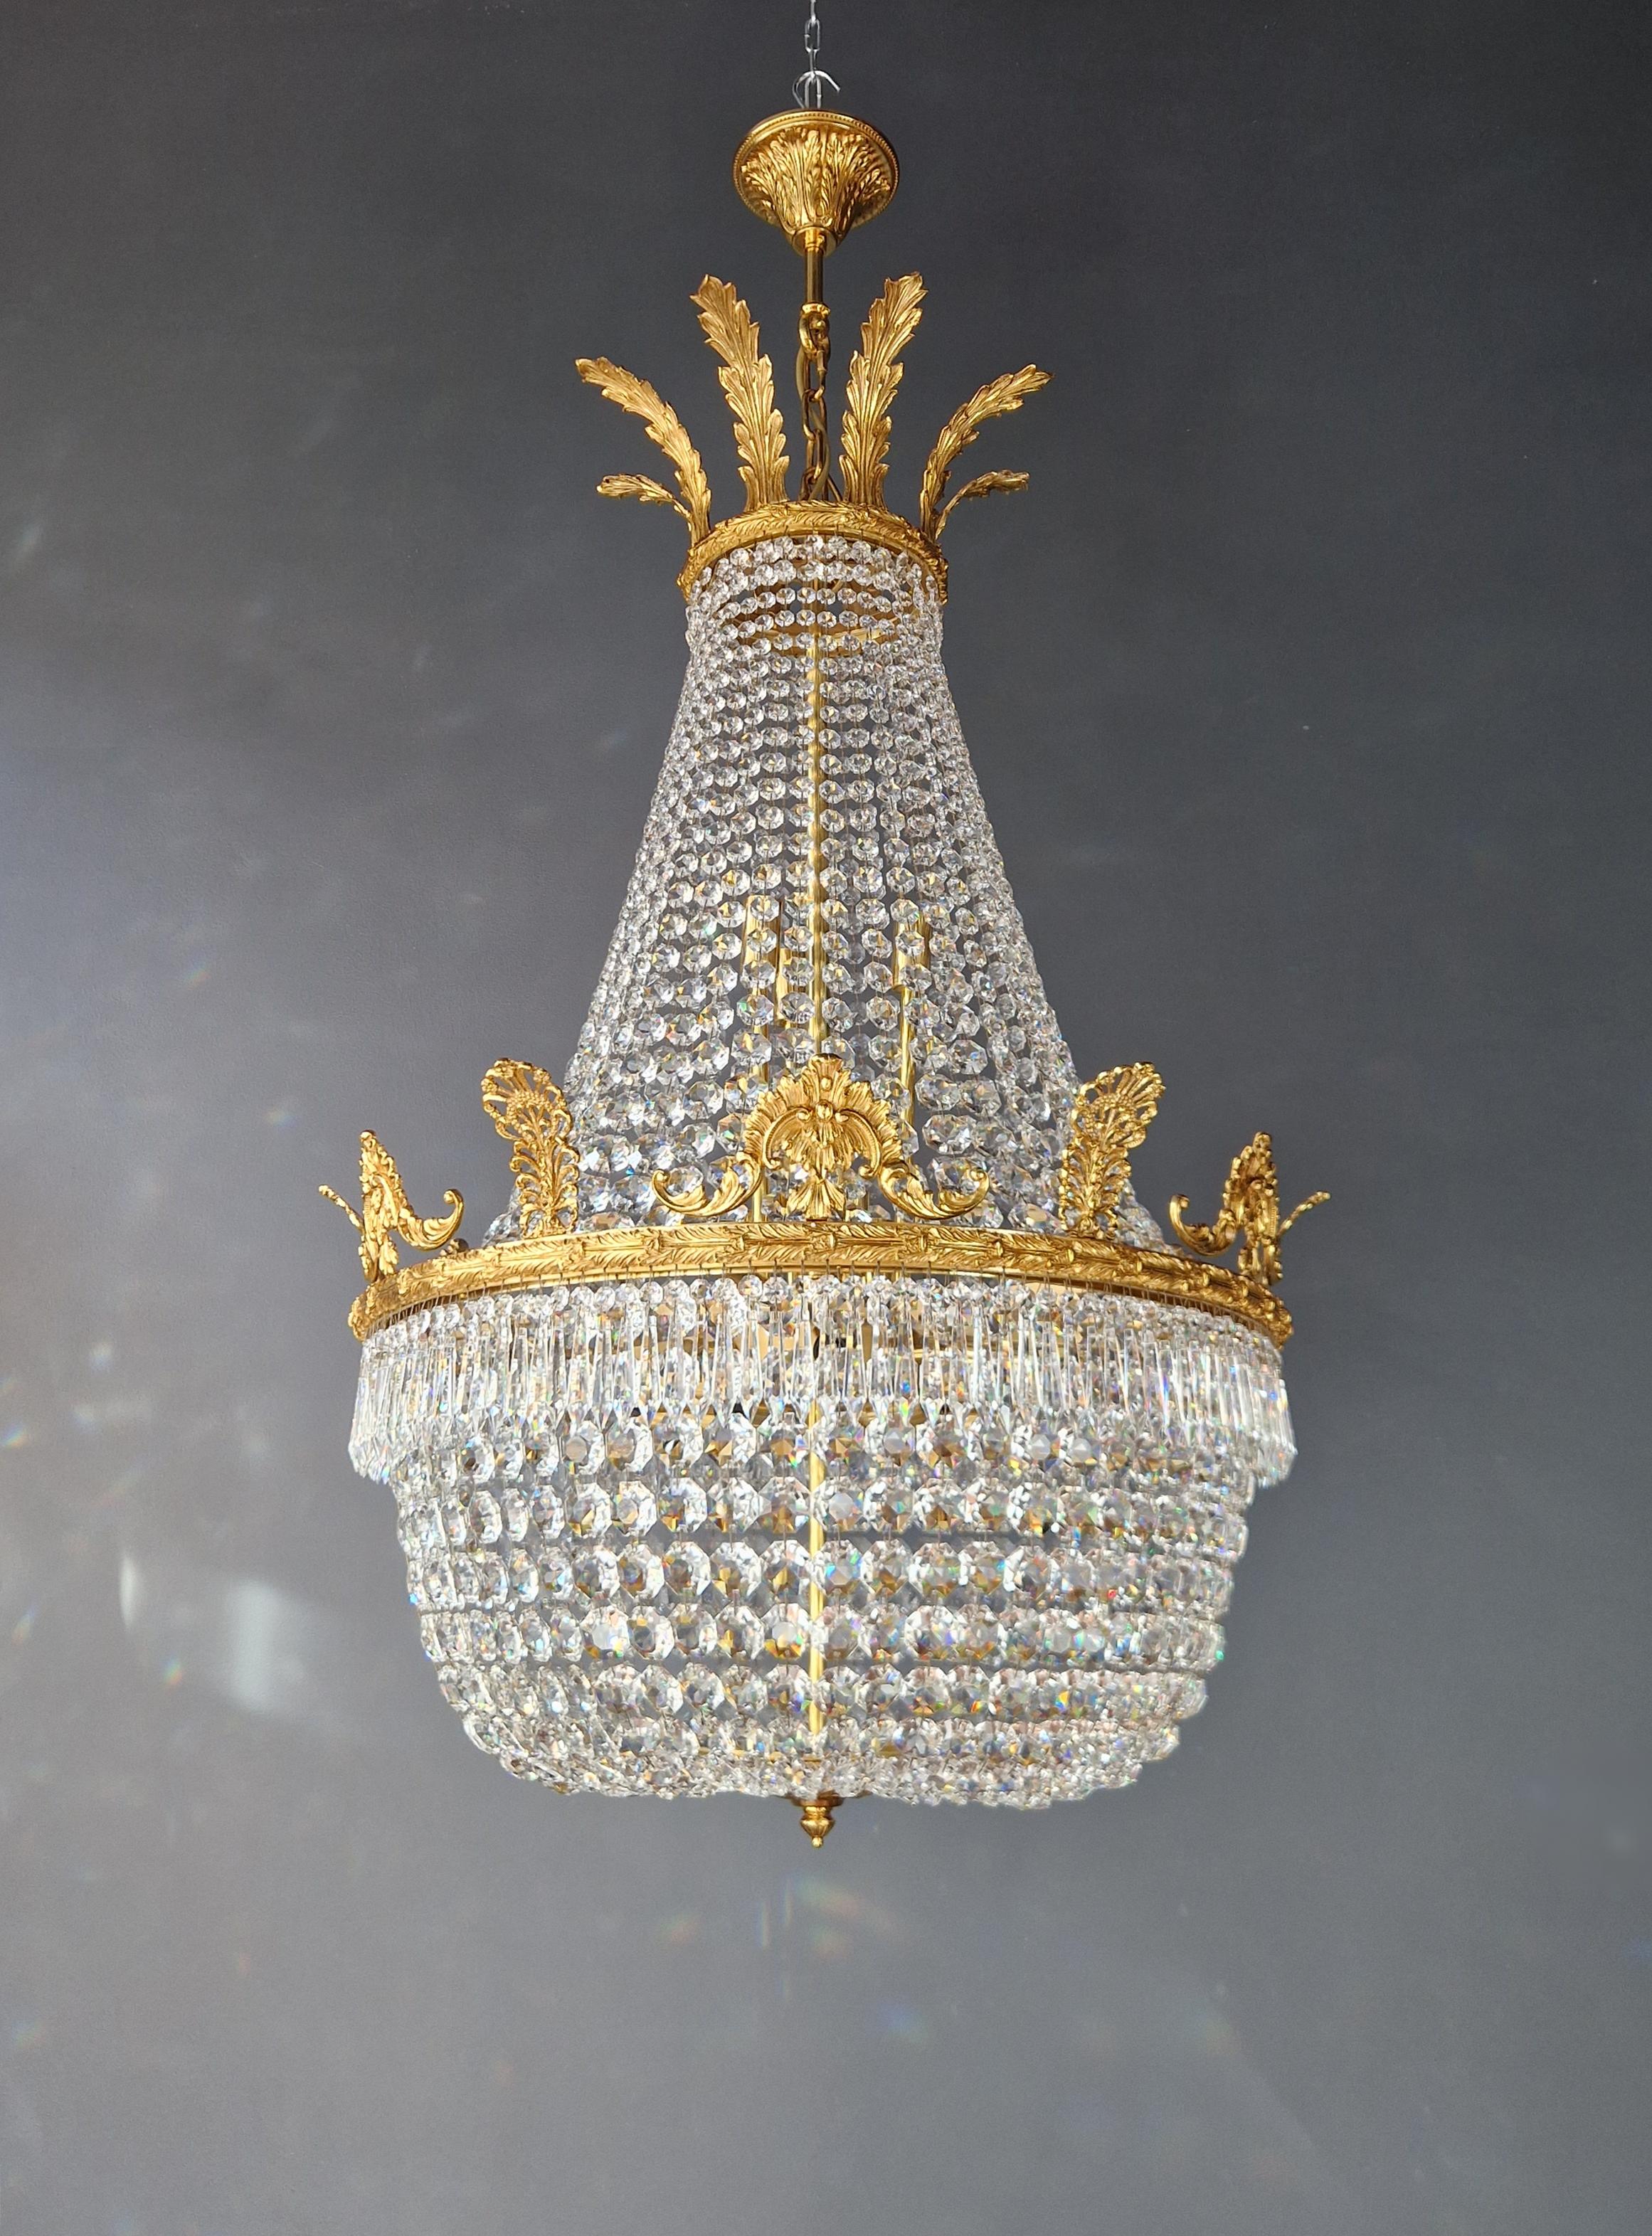 European Brass Basket Empire Sac a Pearl Chandelier Crystal Lustre Lamp Antique Gold For Sale